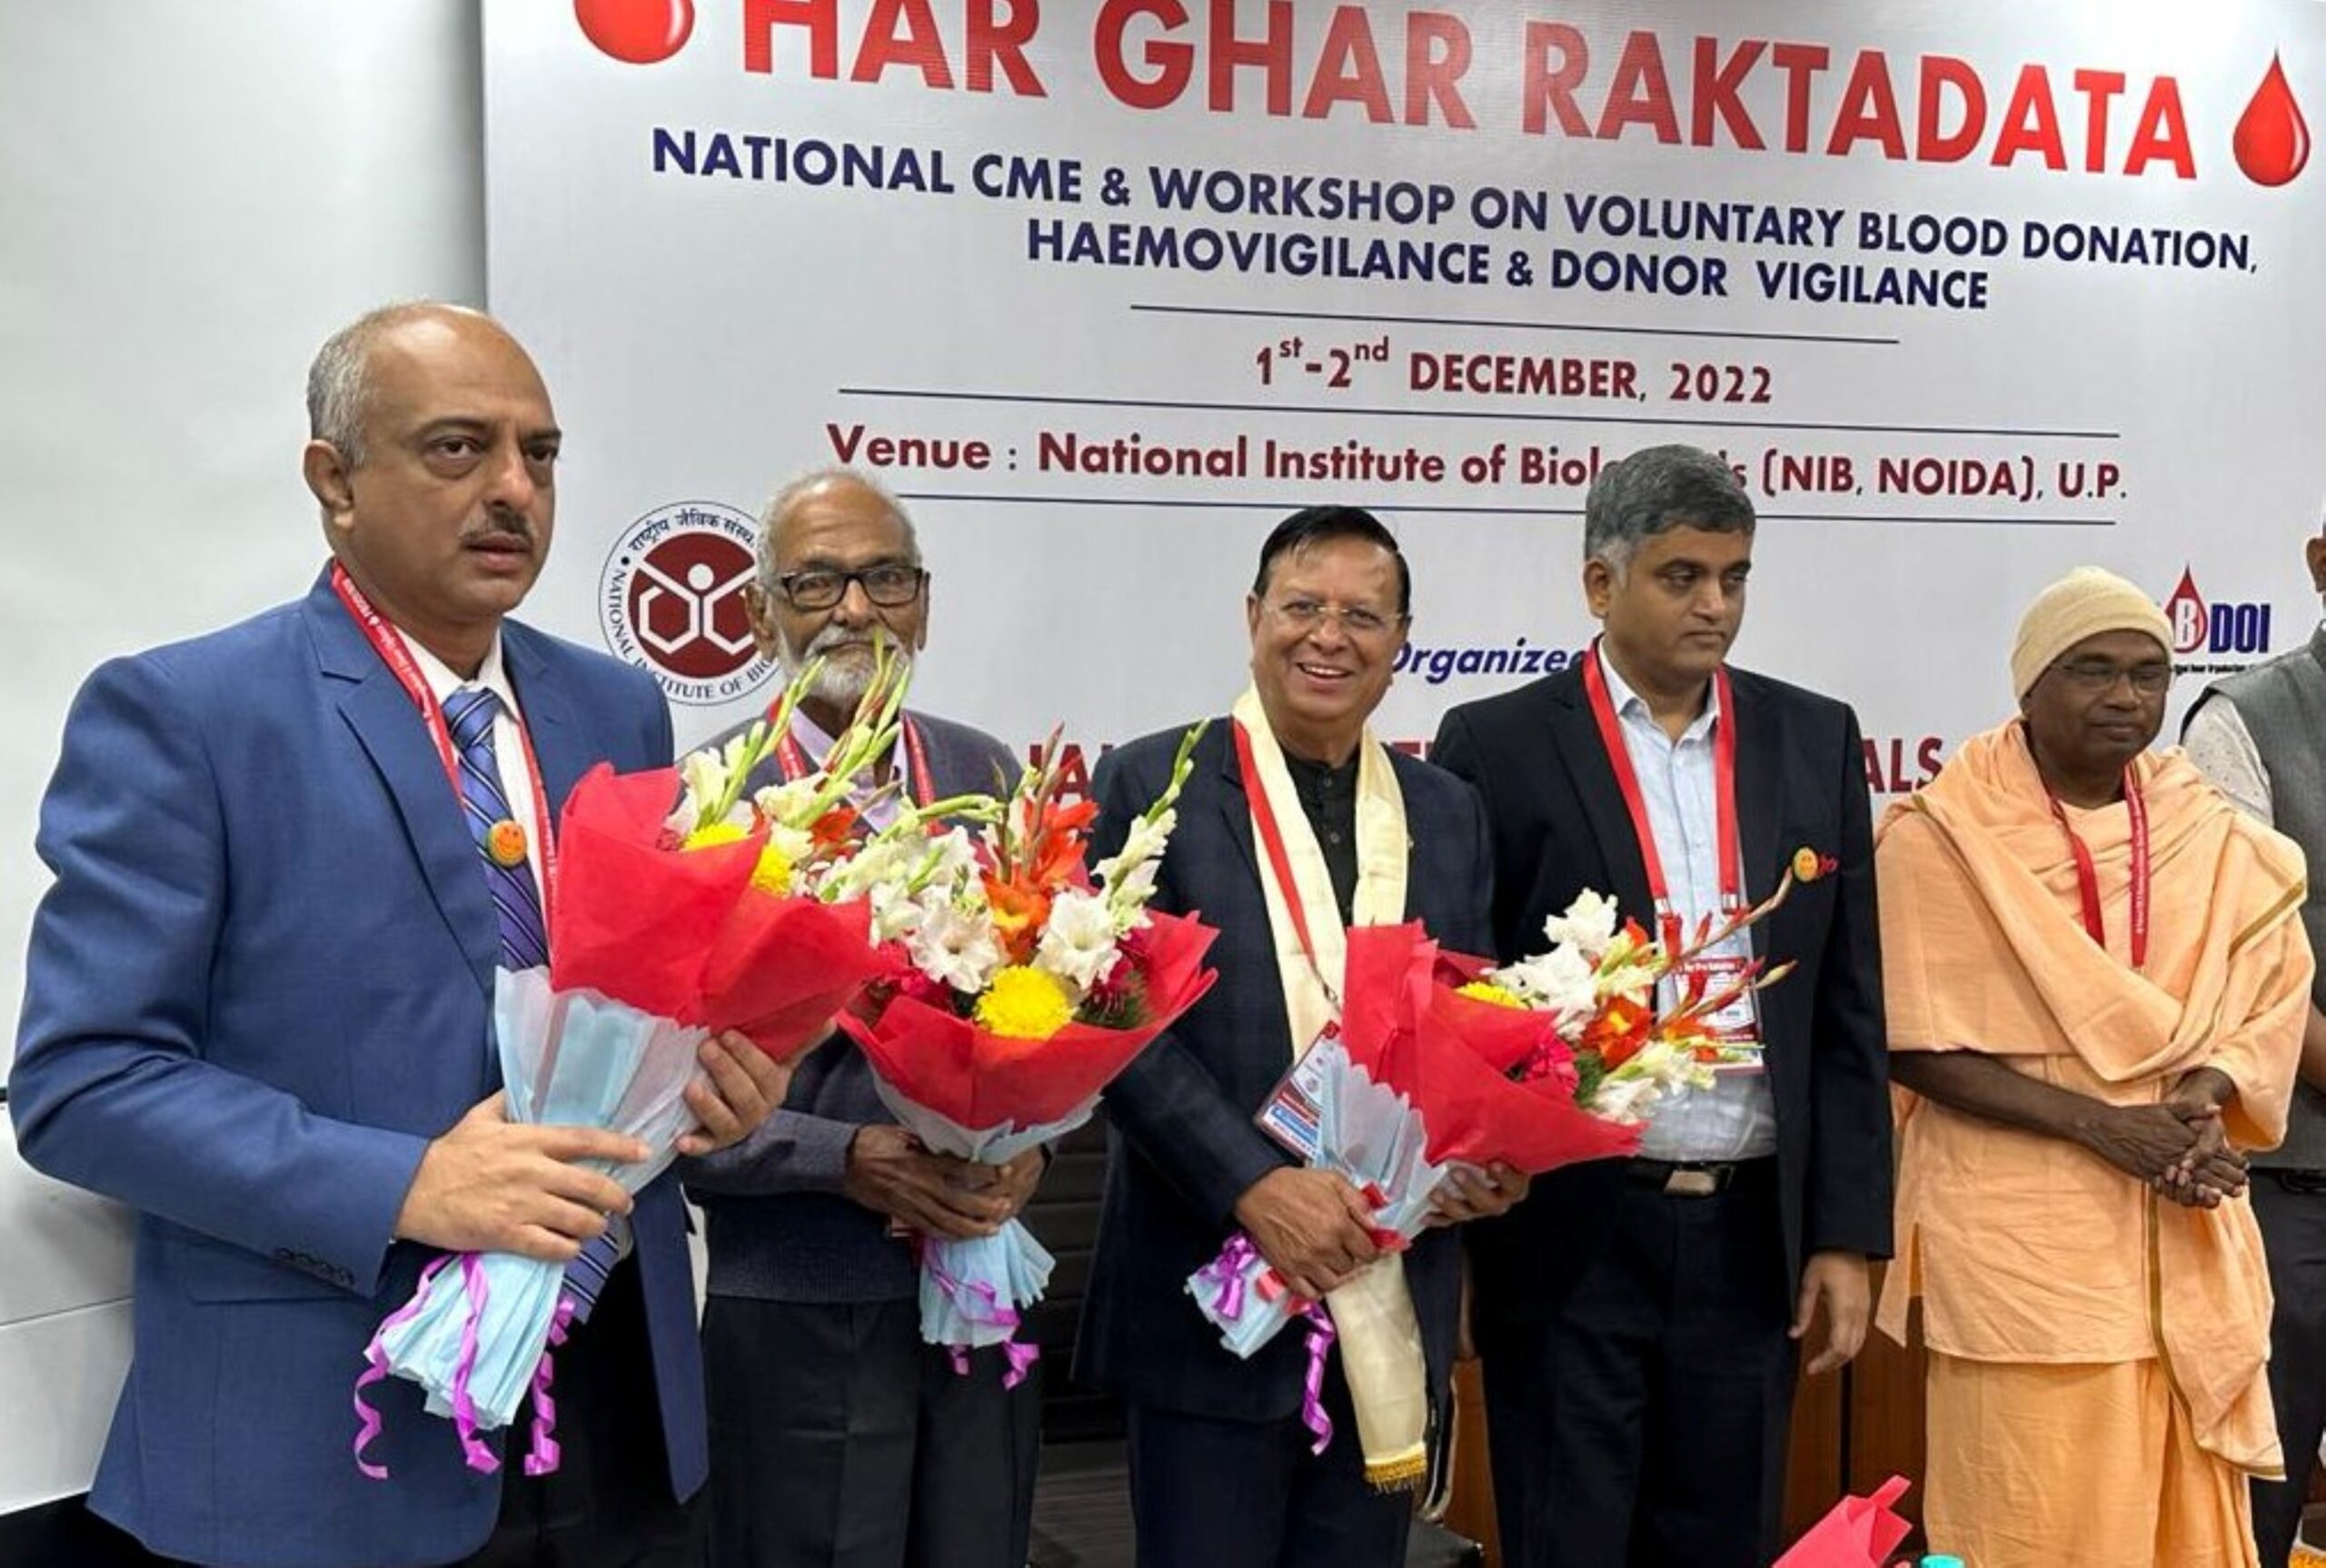 Hyderabad-based Thalassemia Sickle Cell Society, President, Shri Chandrakant Agarwal recognized with the most prestigious “H. D. SHOURIE MEMORIAL NATIONAL AWARD”